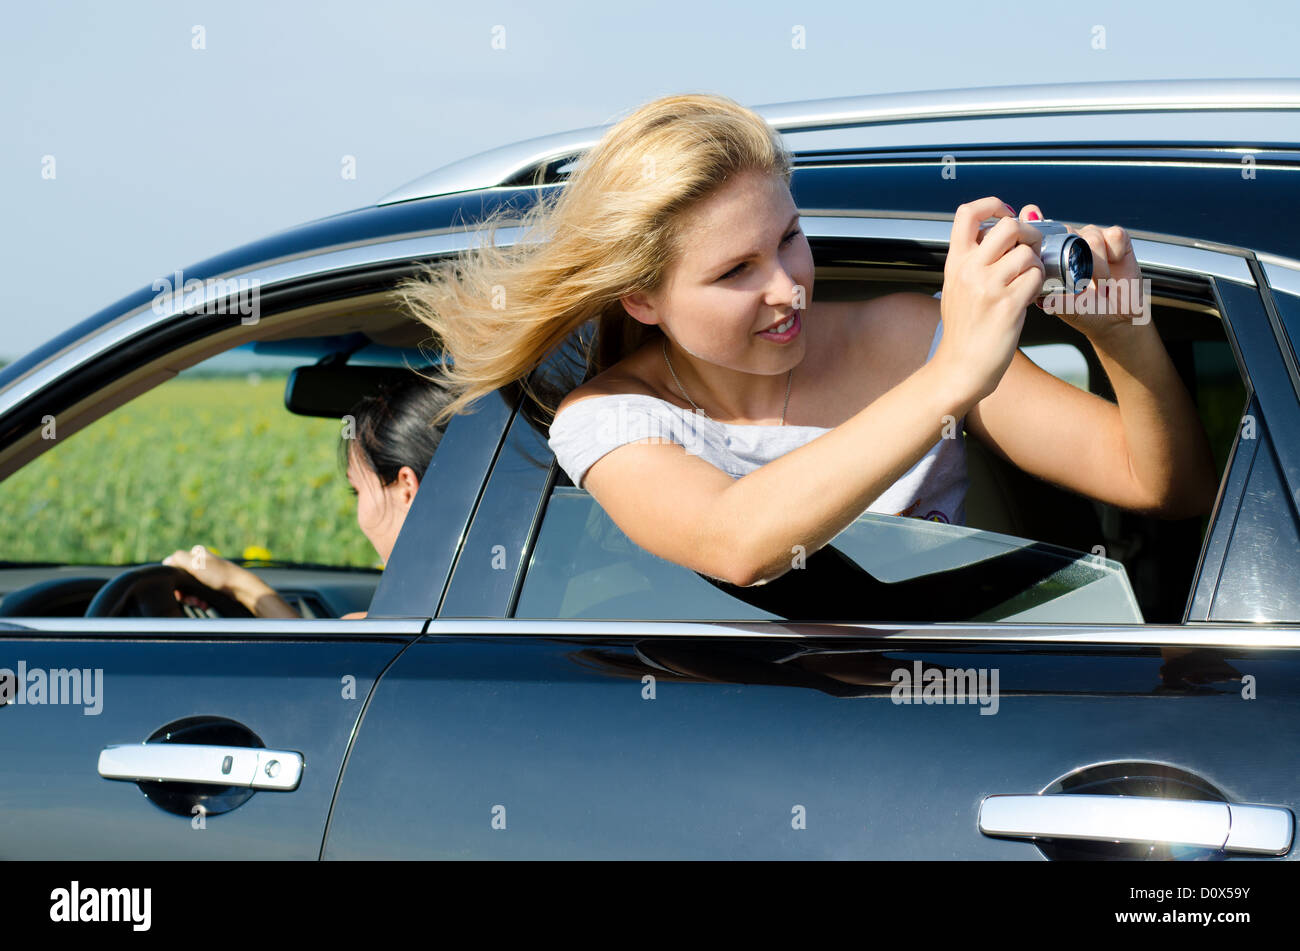 Attractive woman leaning out and photographing from the open rear car window with her hair blowing in the breeze Stock Photo